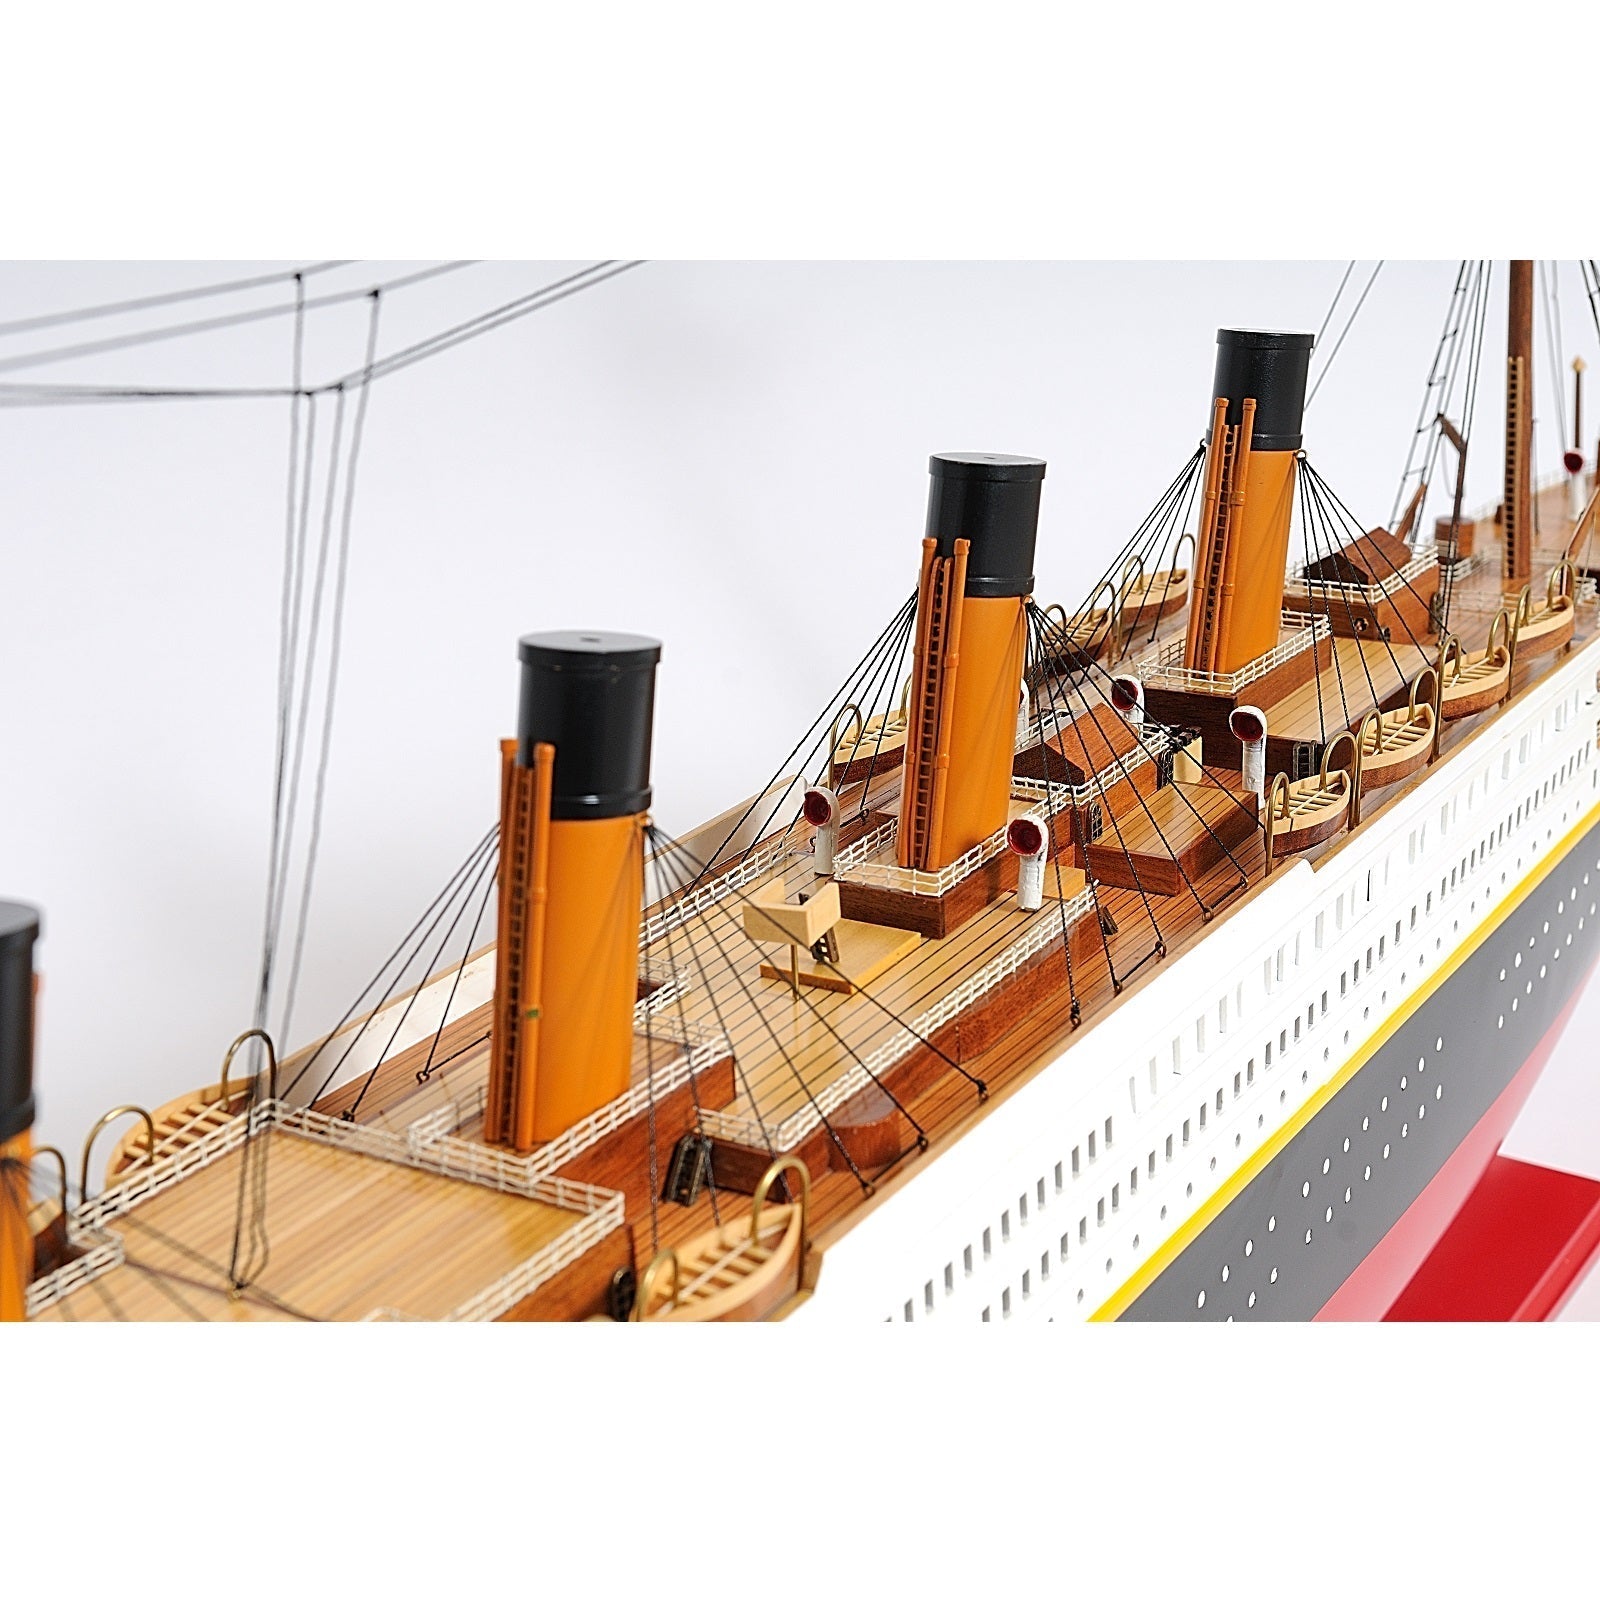 Titanic Painted XL, Fully Assembled